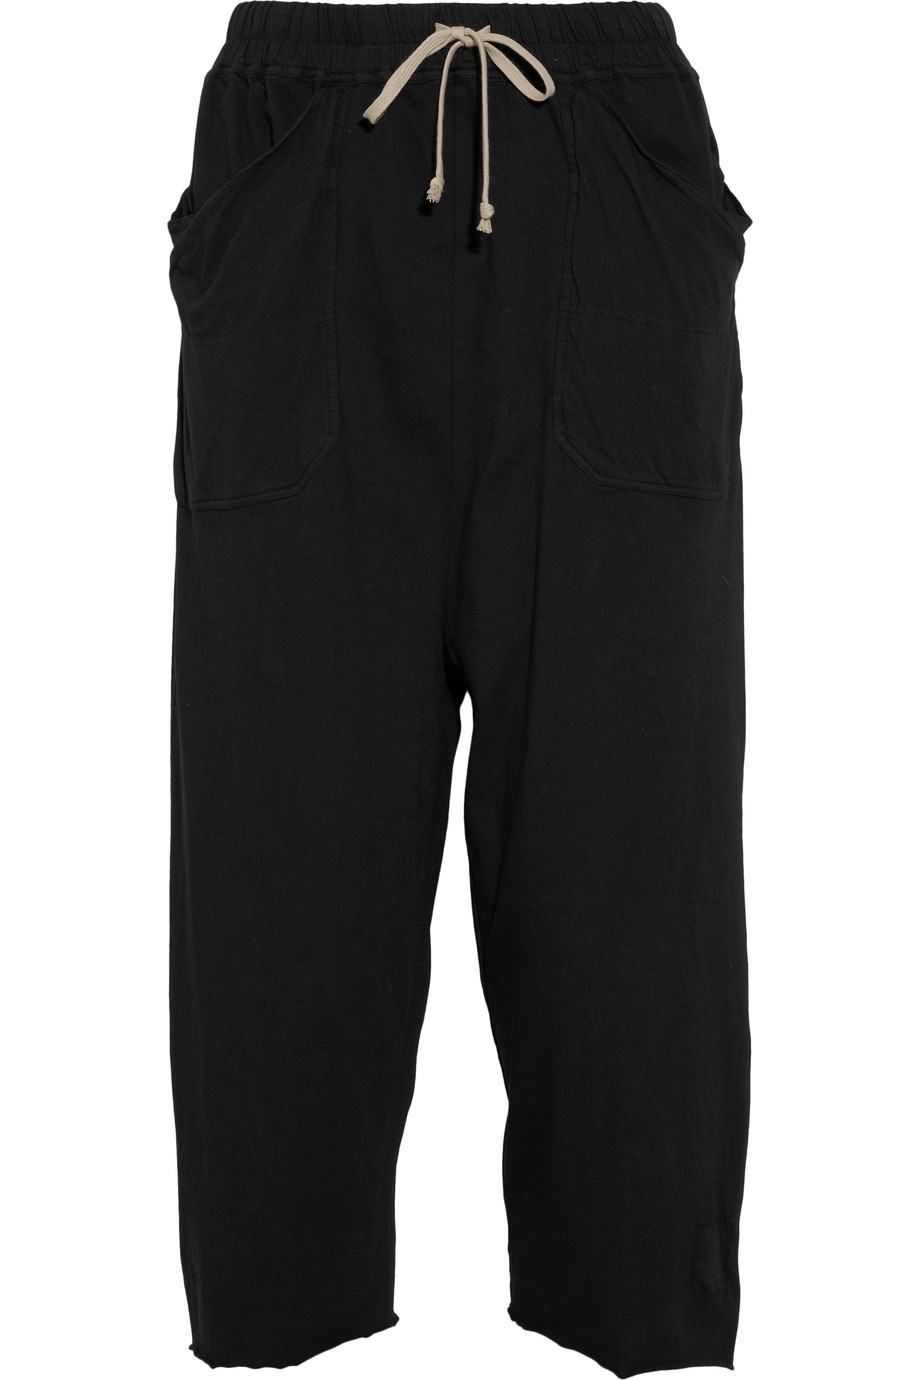 Drkshdw By Rick Owens Cropped Cottonjersey Harem Track Pants in Black ...